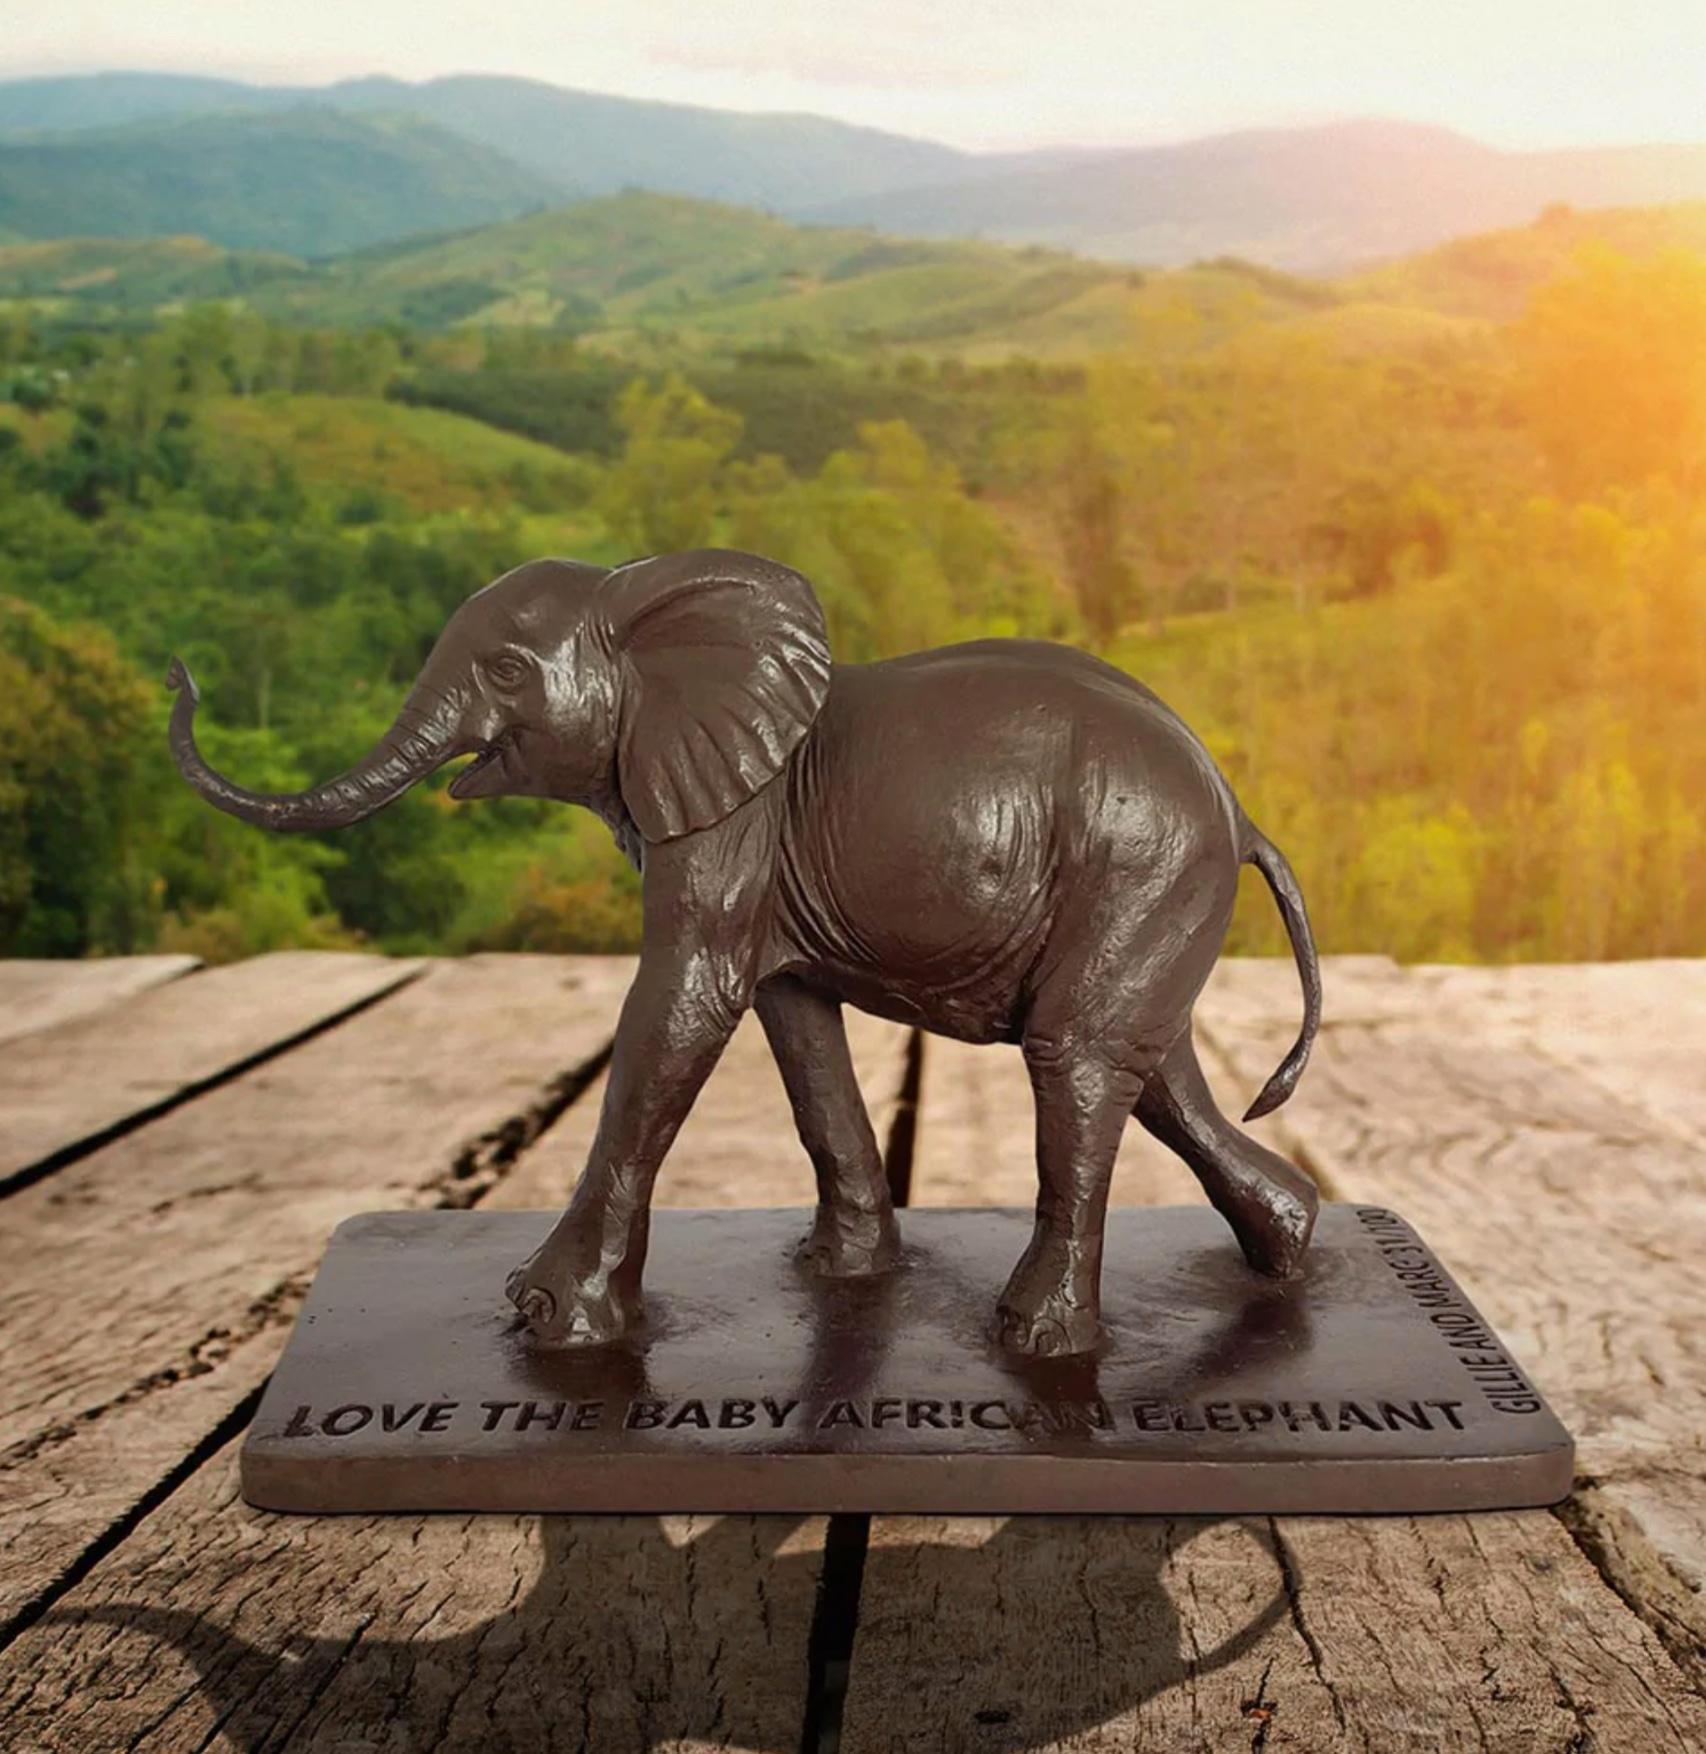 Title: Love the African Elephant
Authentic Bronze Sculpture

Description:
This authentic bronze sculpture titled 'Love the Baby African Elephant' by artists Gillie and Marc has been meticulously crafted in bronze. It features a baby African Elephant